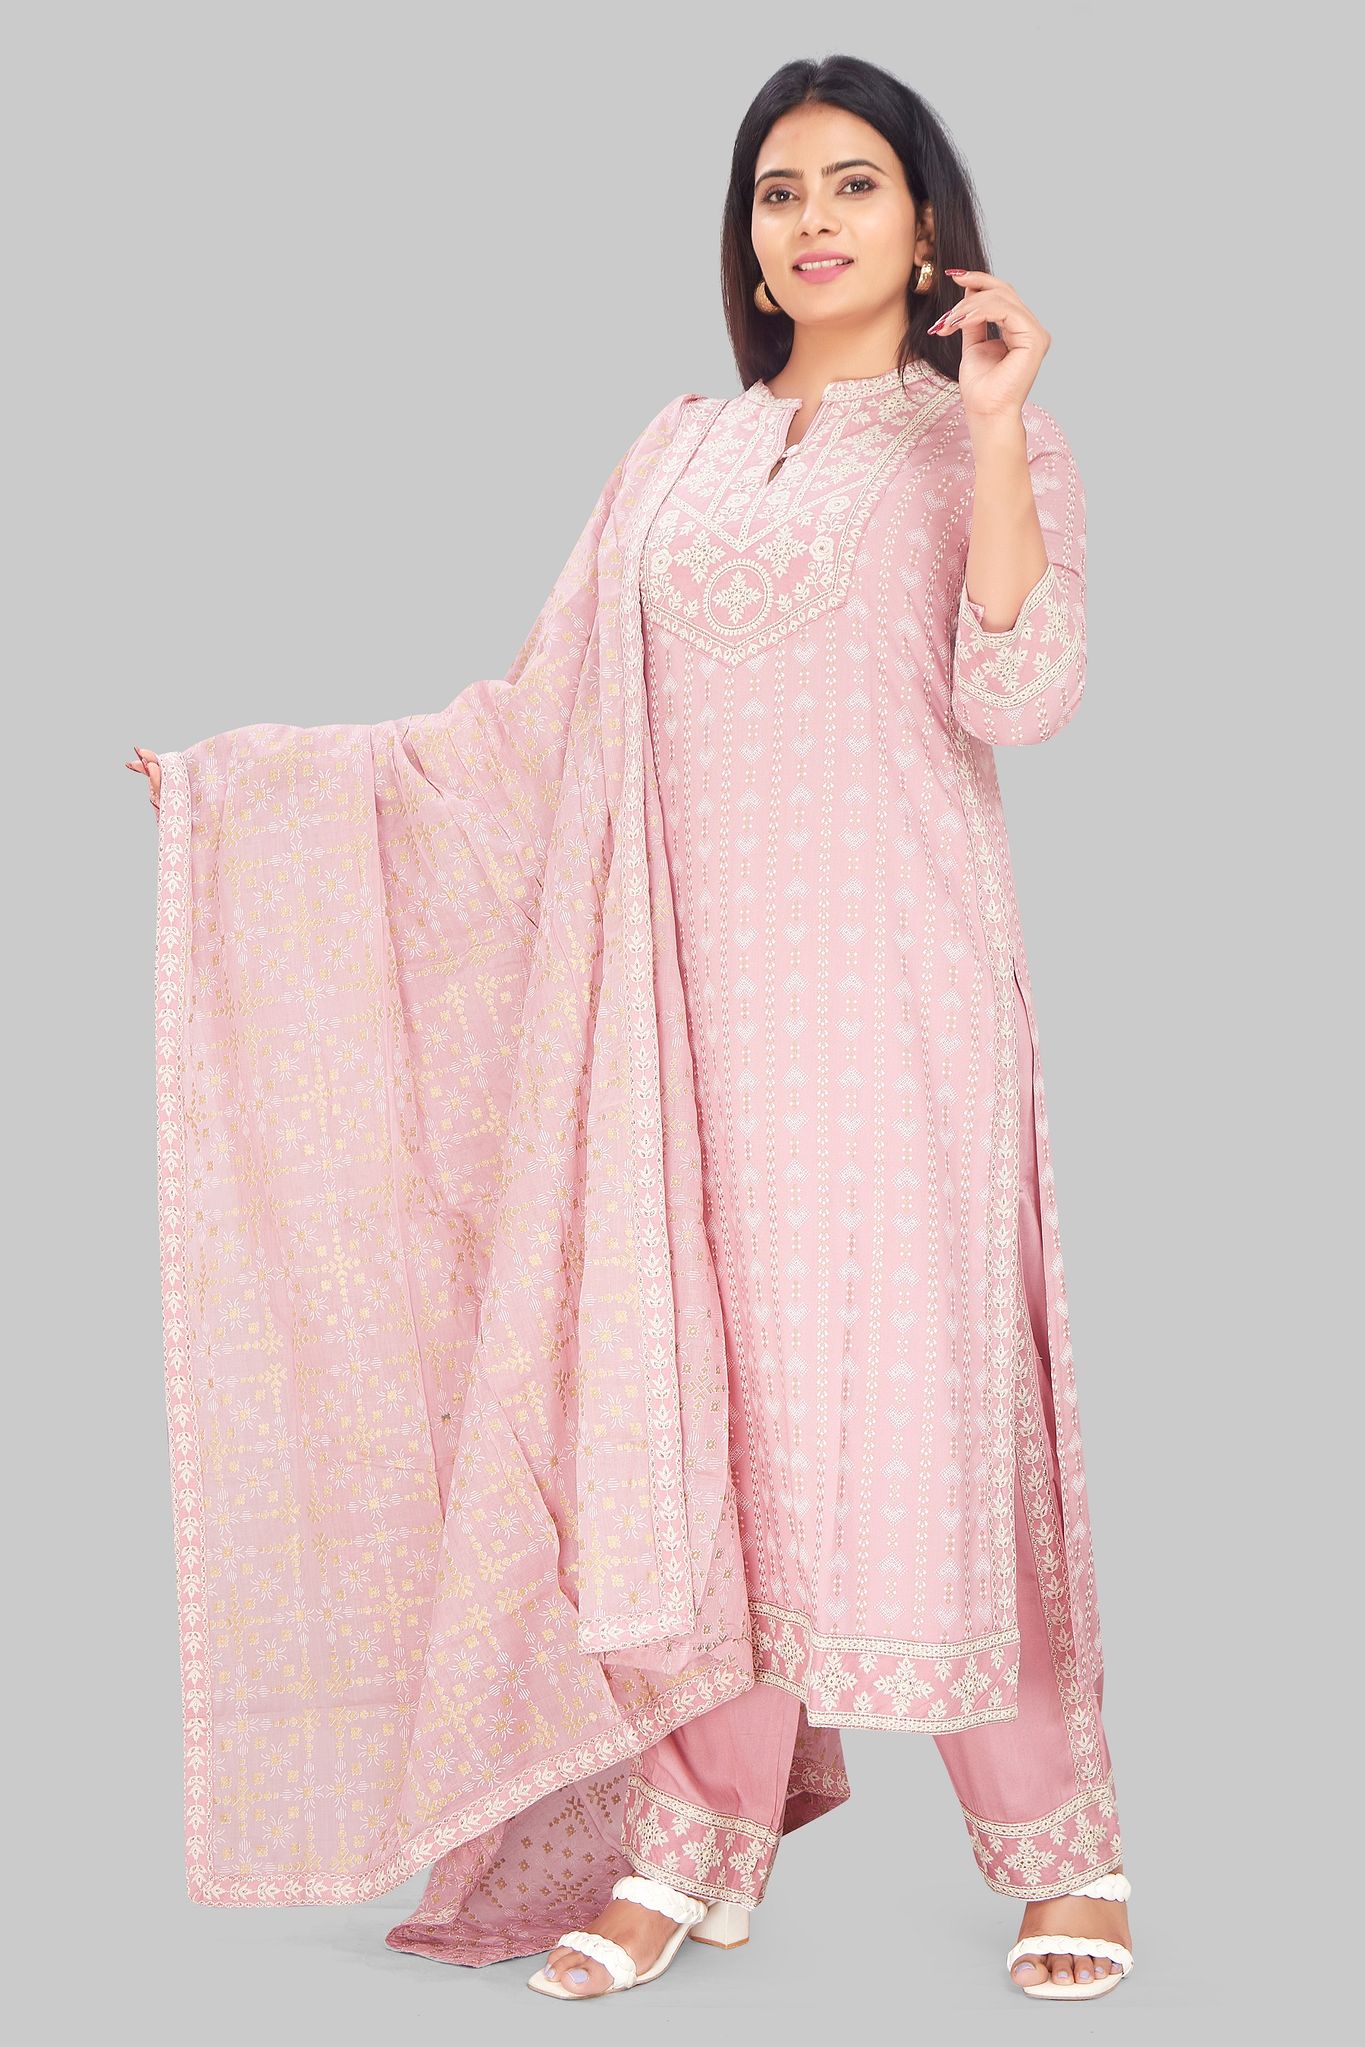 Sultana Pink Rayon Embroidered Suit Set